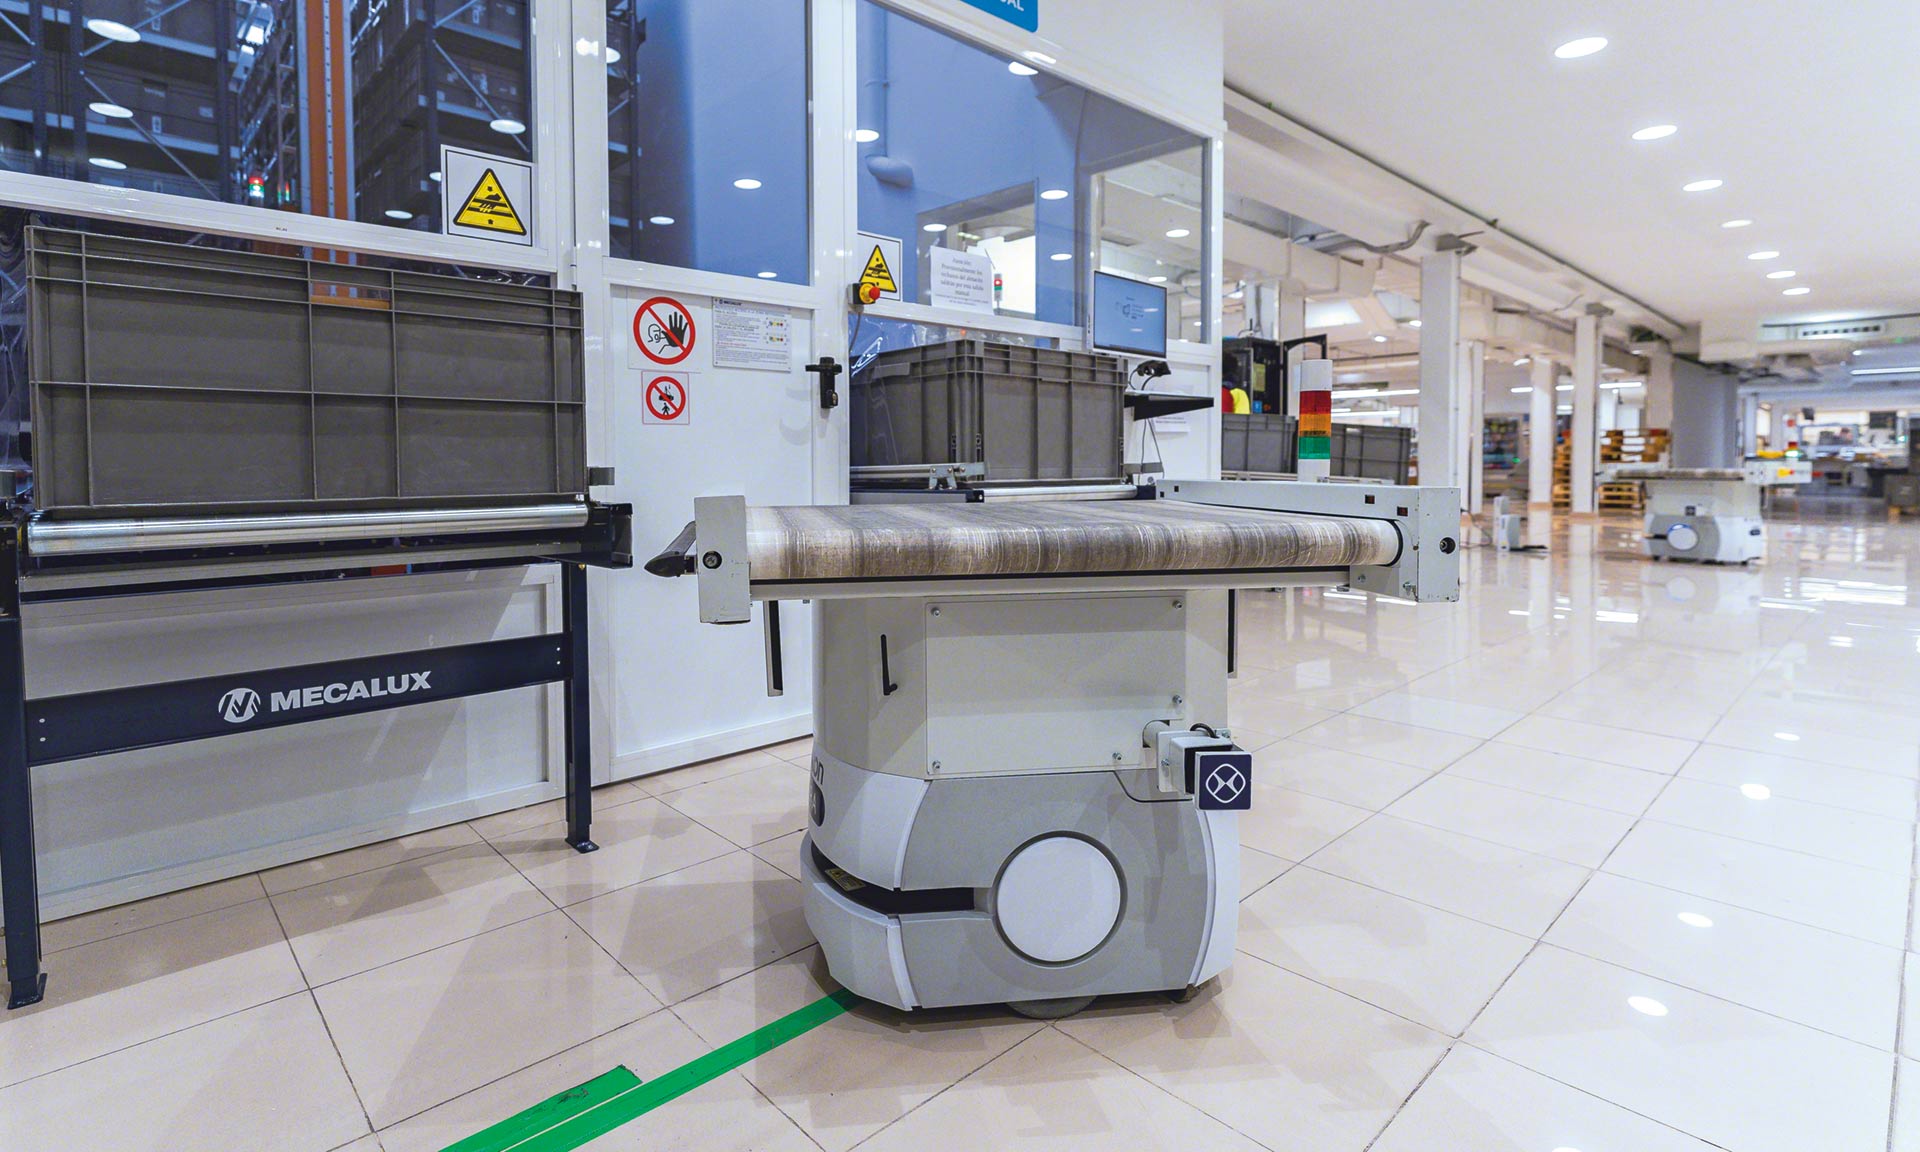 agv robot is placed in which category